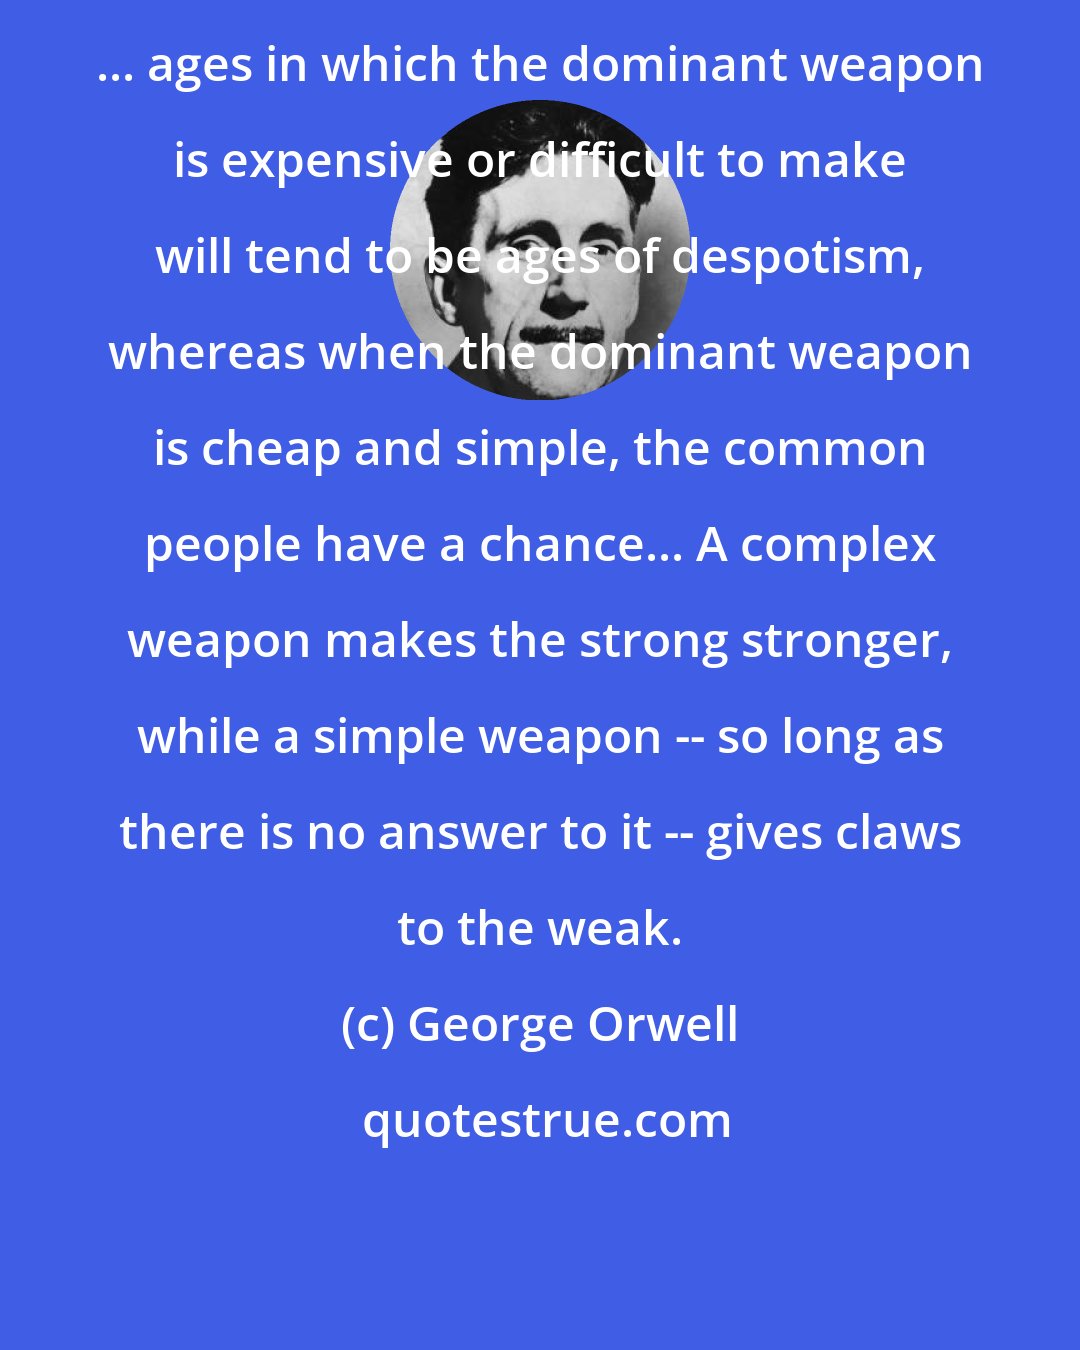 George Orwell: ... ages in which the dominant weapon is expensive or difficult to make will tend to be ages of despotism, whereas when the dominant weapon is cheap and simple, the common people have a chance... A complex weapon makes the strong stronger, while a simple weapon -- so long as there is no answer to it -- gives claws to the weak.